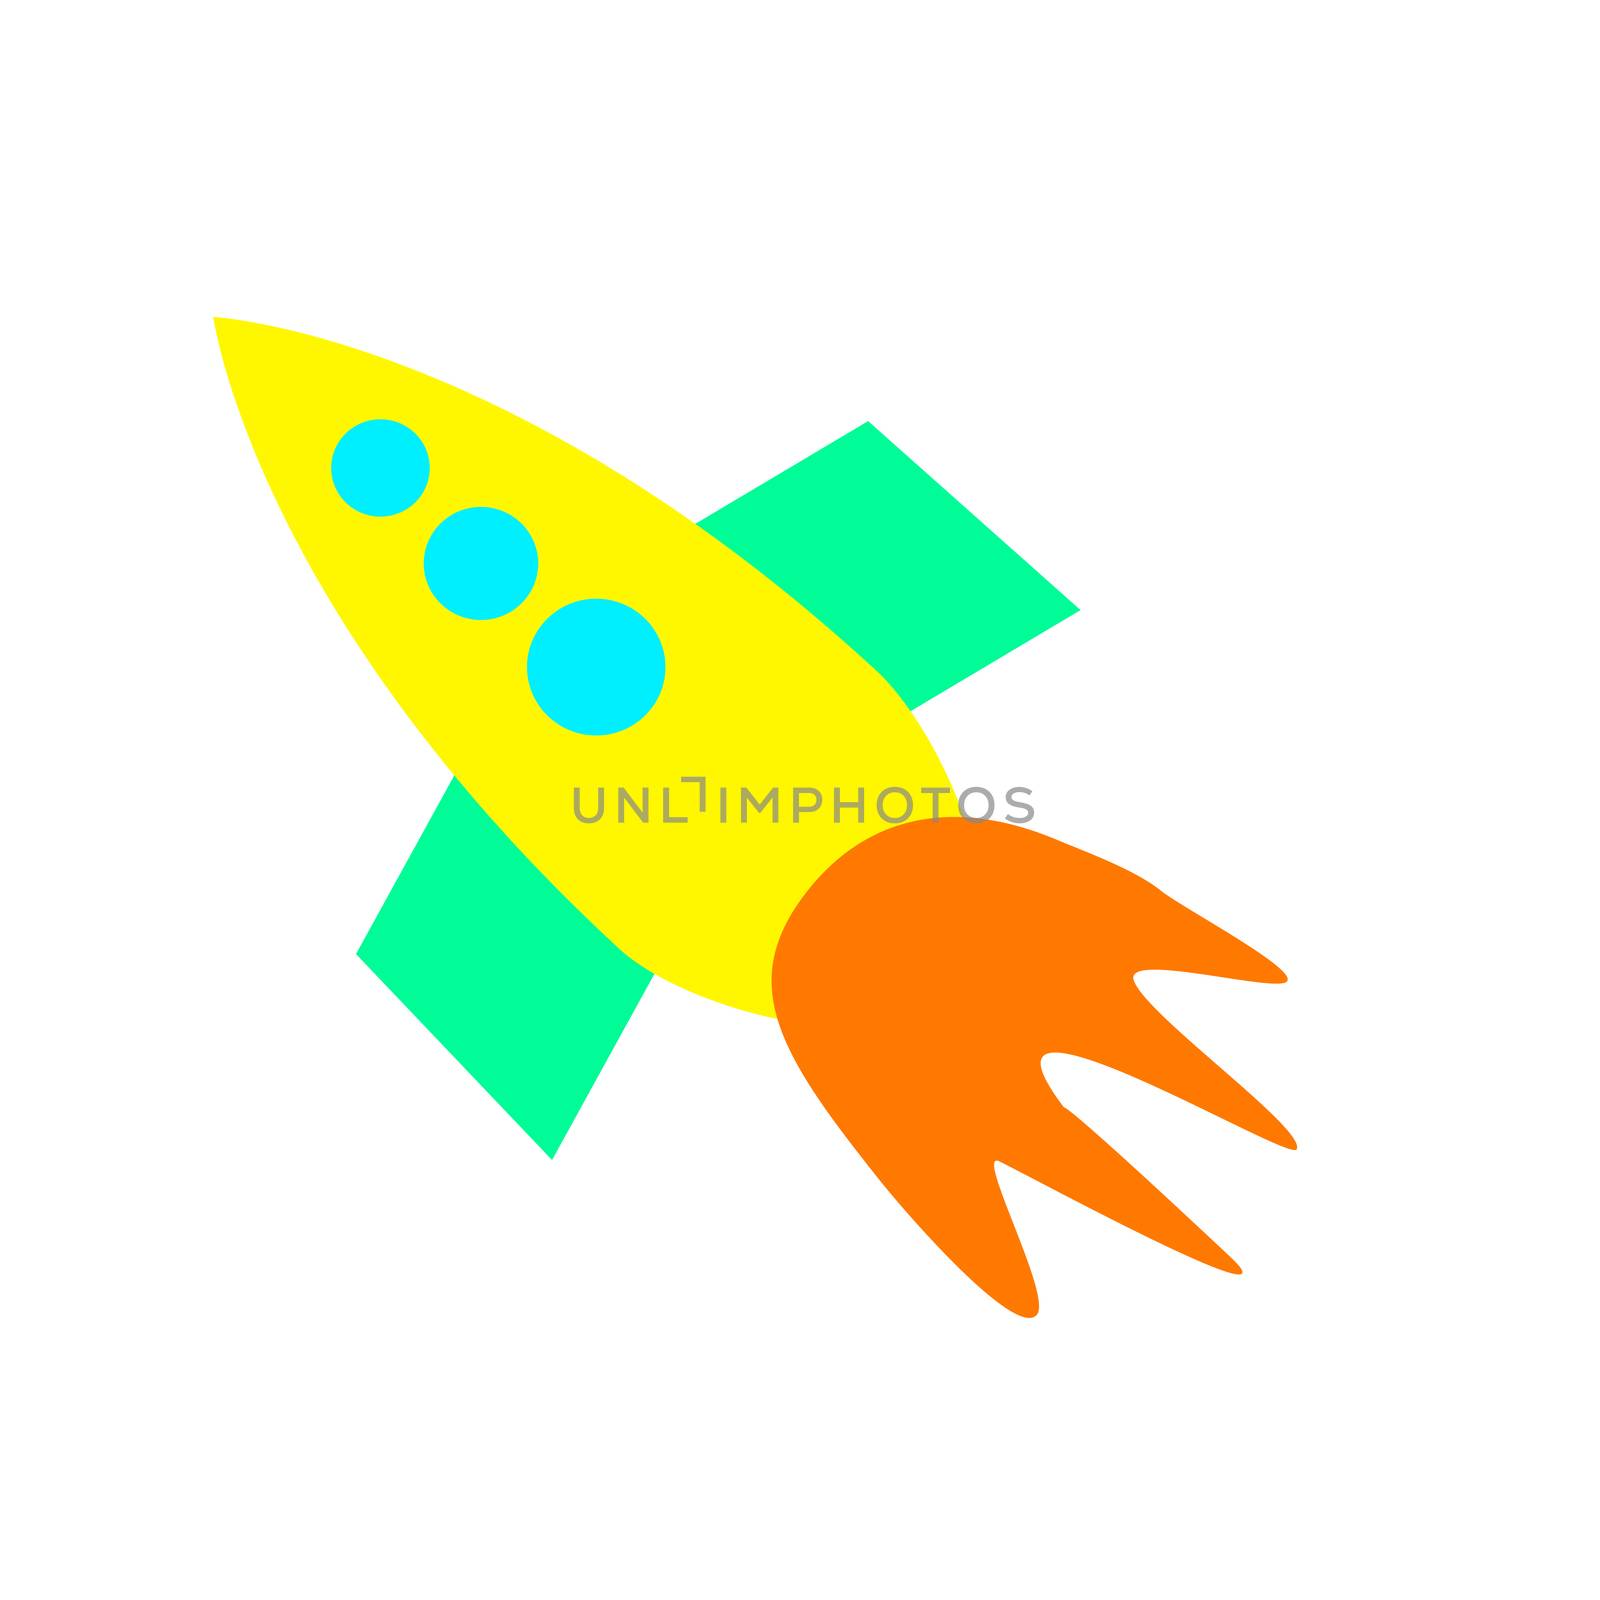 Illustration of a childlike colored rocket for the flight into space